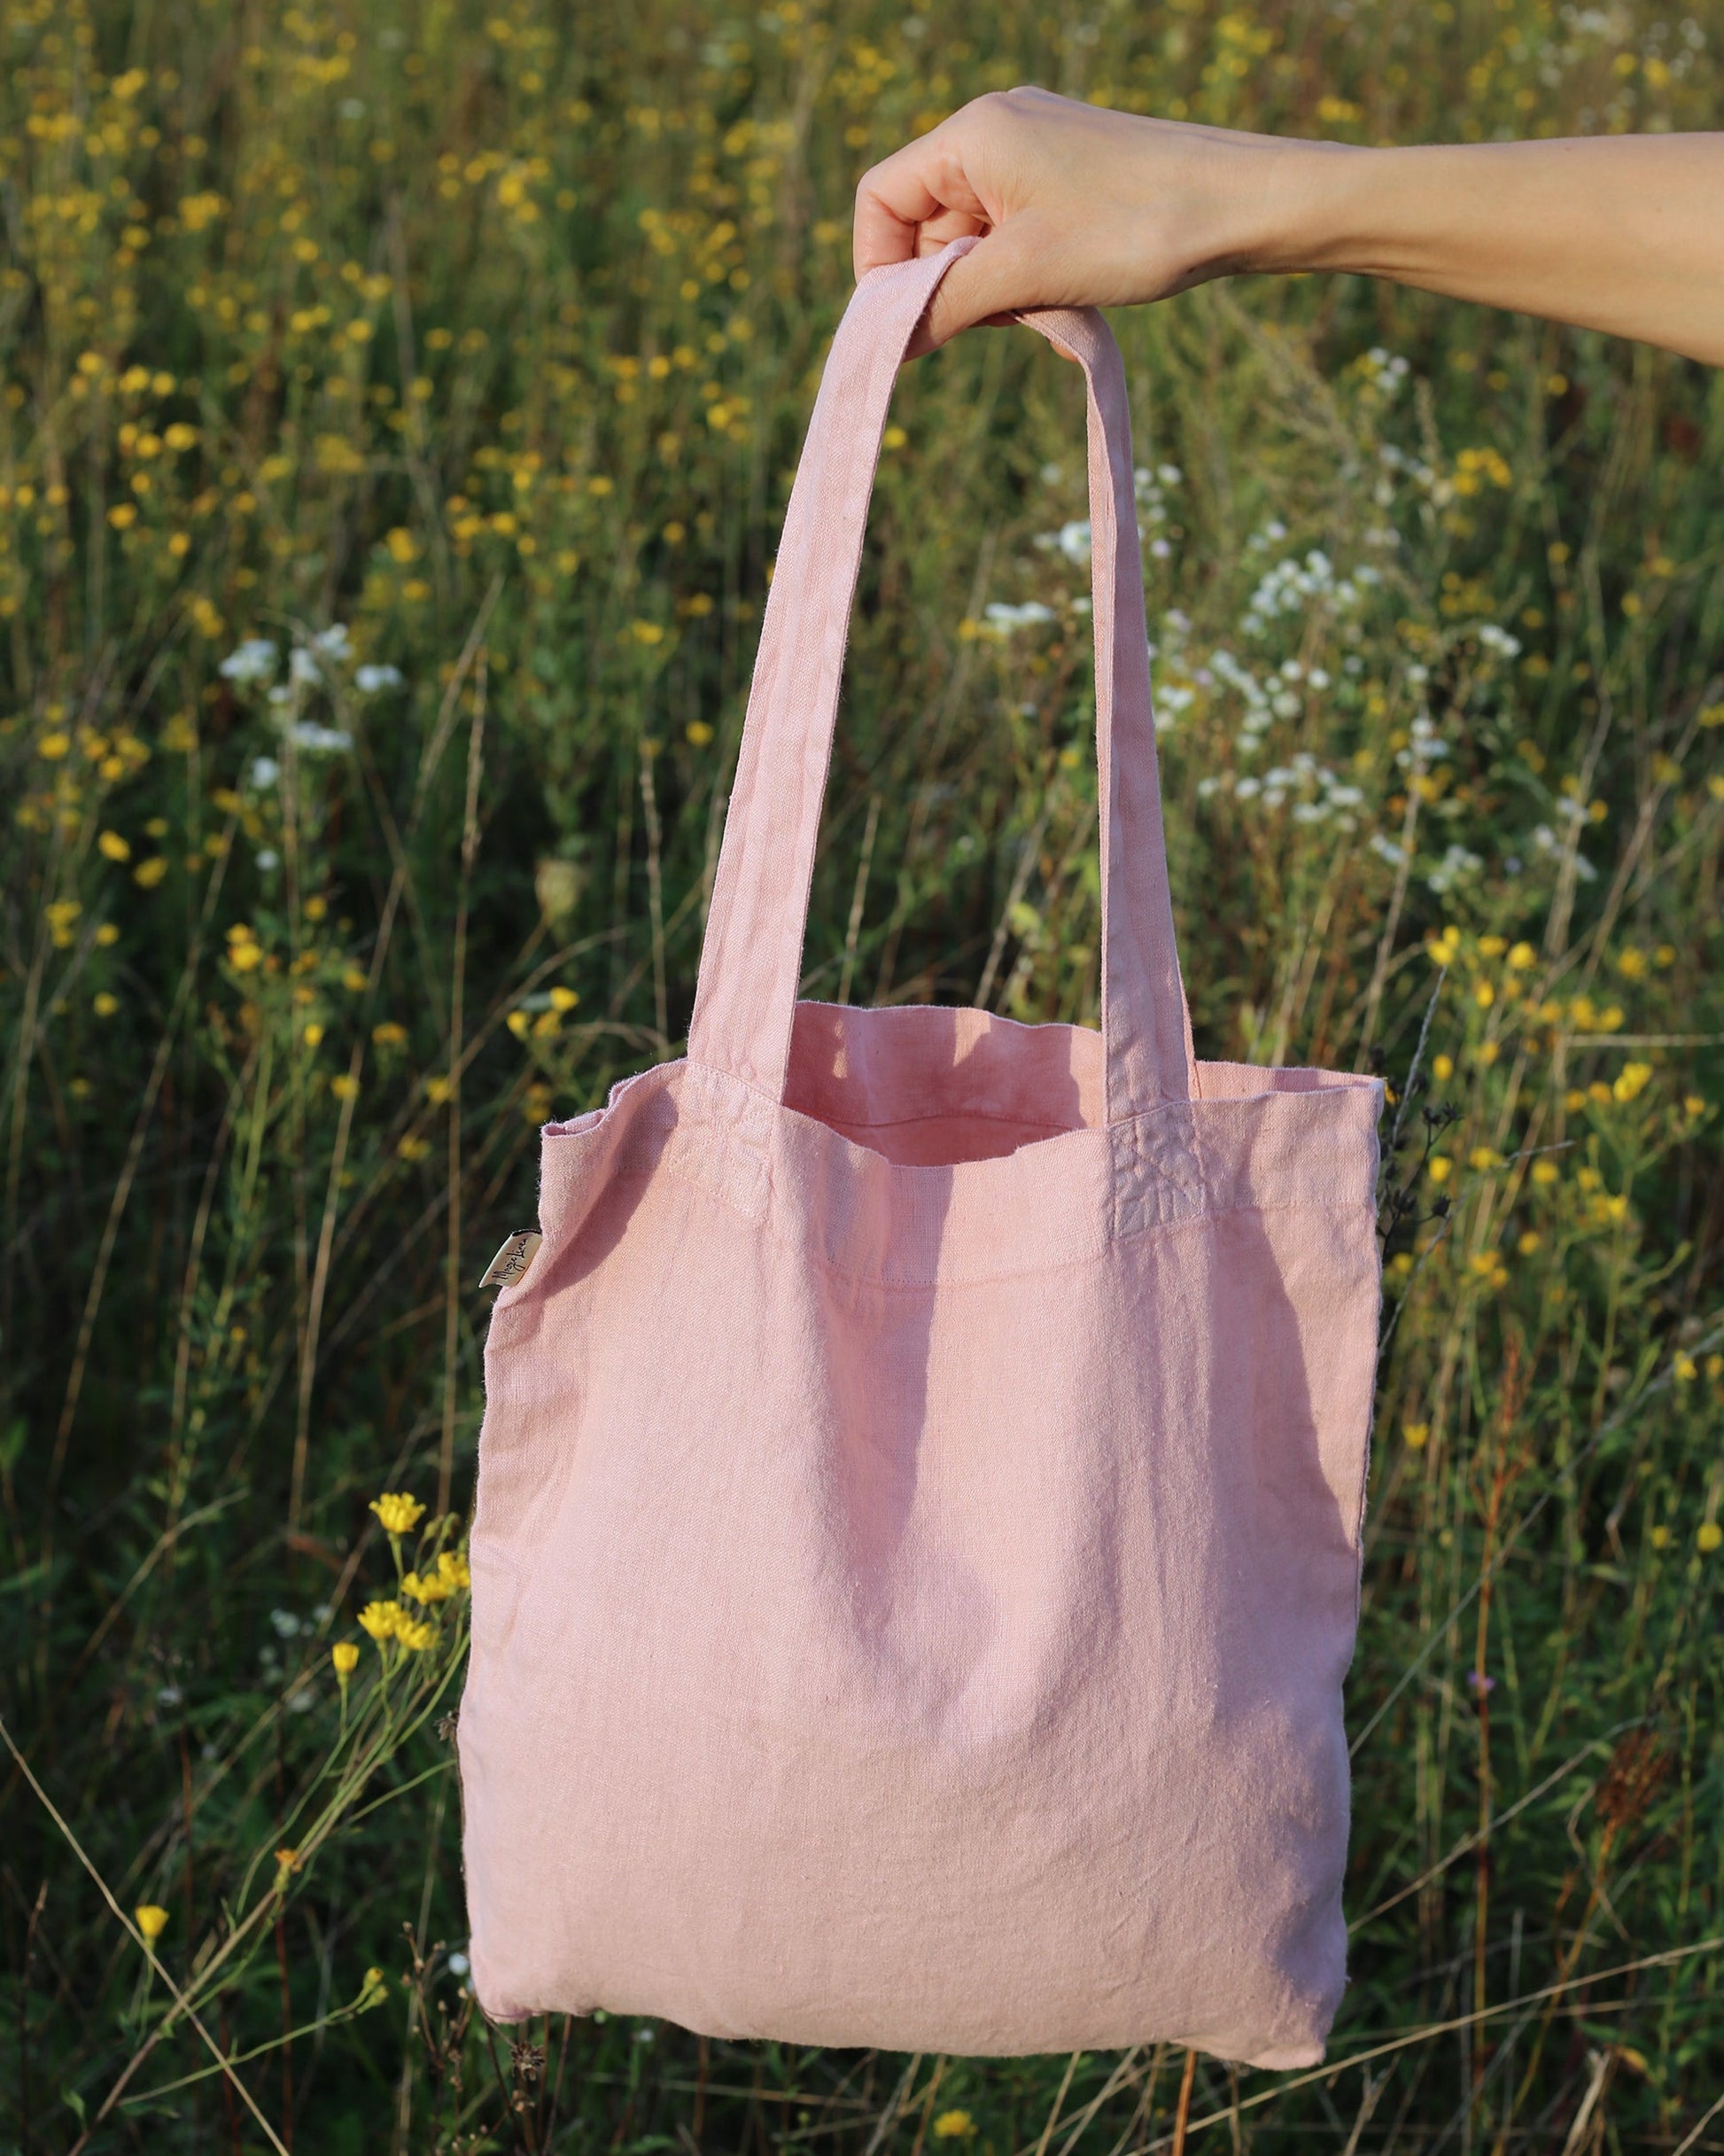 Linen tote bag in Dusty pink - MagicLinen